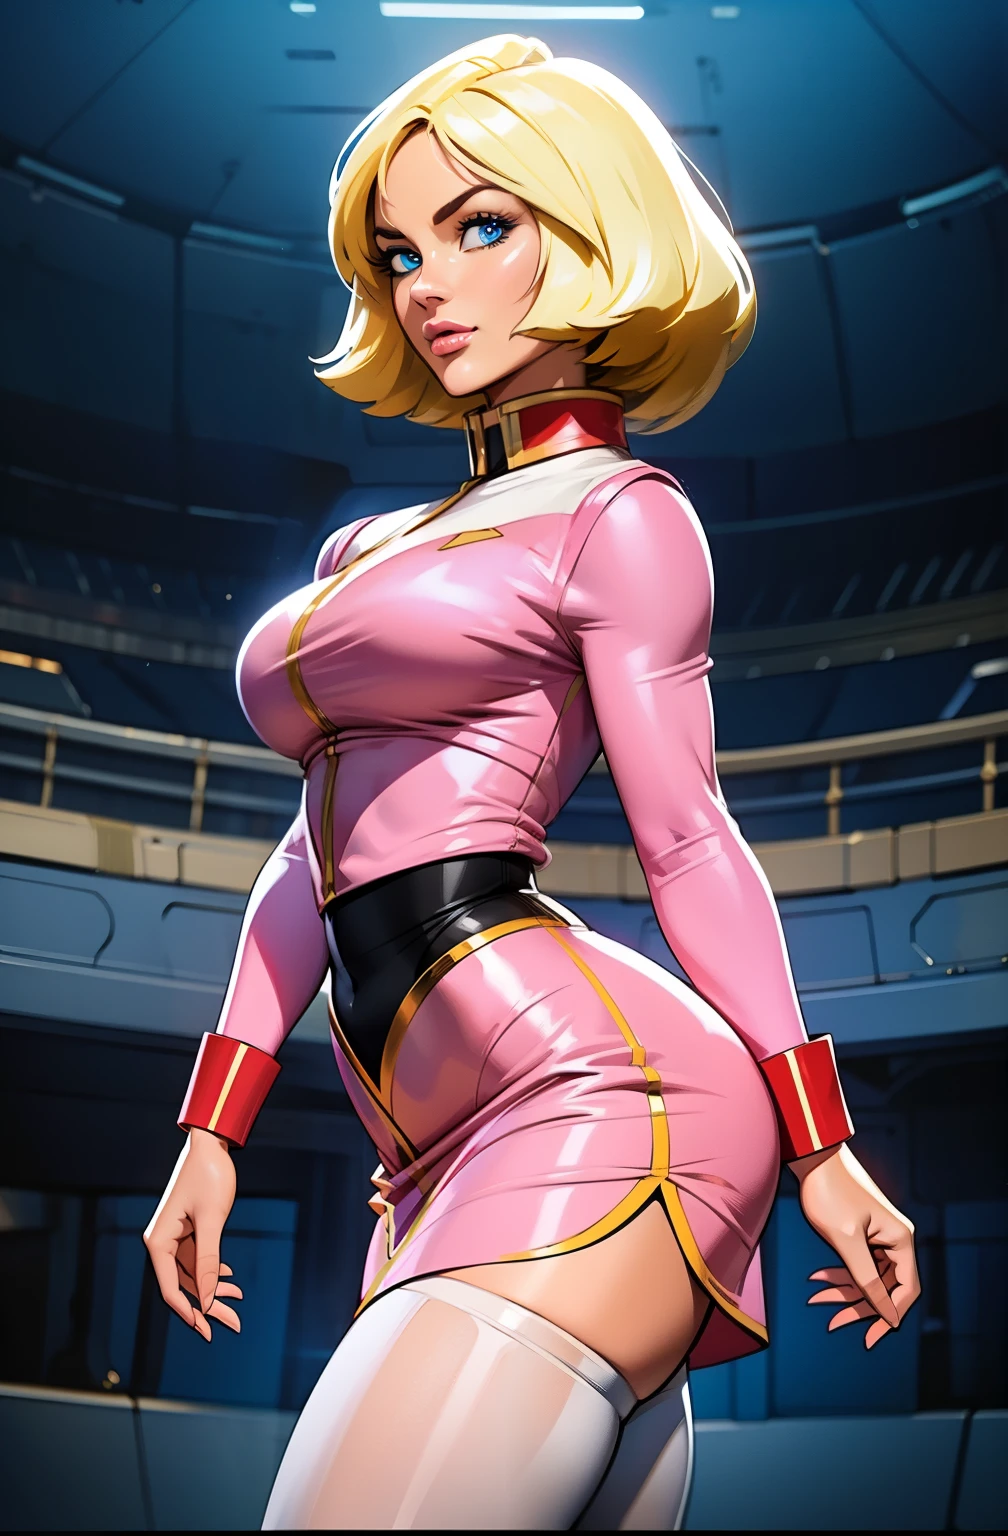 ((masterpiece)), ((cinematic lighting)), realistic photo、Real Images、Top image quality、1girl in, sayla mass, Elegant, masterpiece, Convoluted, slim arms, wide hips, thick thighs, thigh gaps, Best Quality, absurderes, high face detail, Perfect eyes, mature, Cowboy Shot, , Vibrant colors, soft pink uniform, soft pink Skirt, white tights, side view, looking at viewer